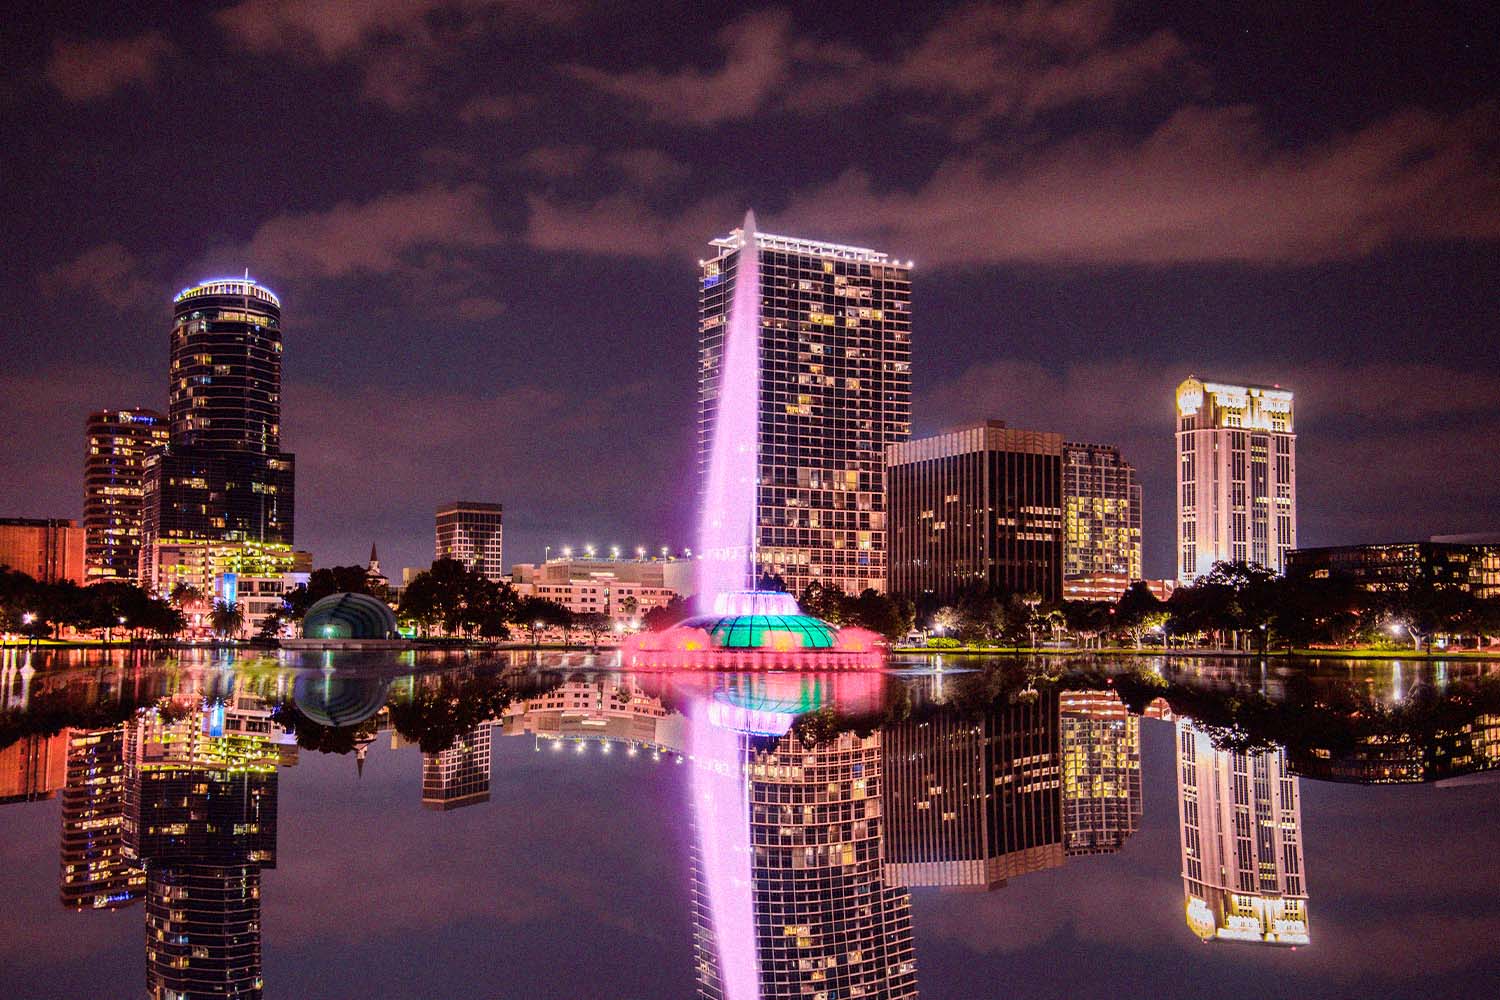 Lake Eola view by night in Orlando Florida